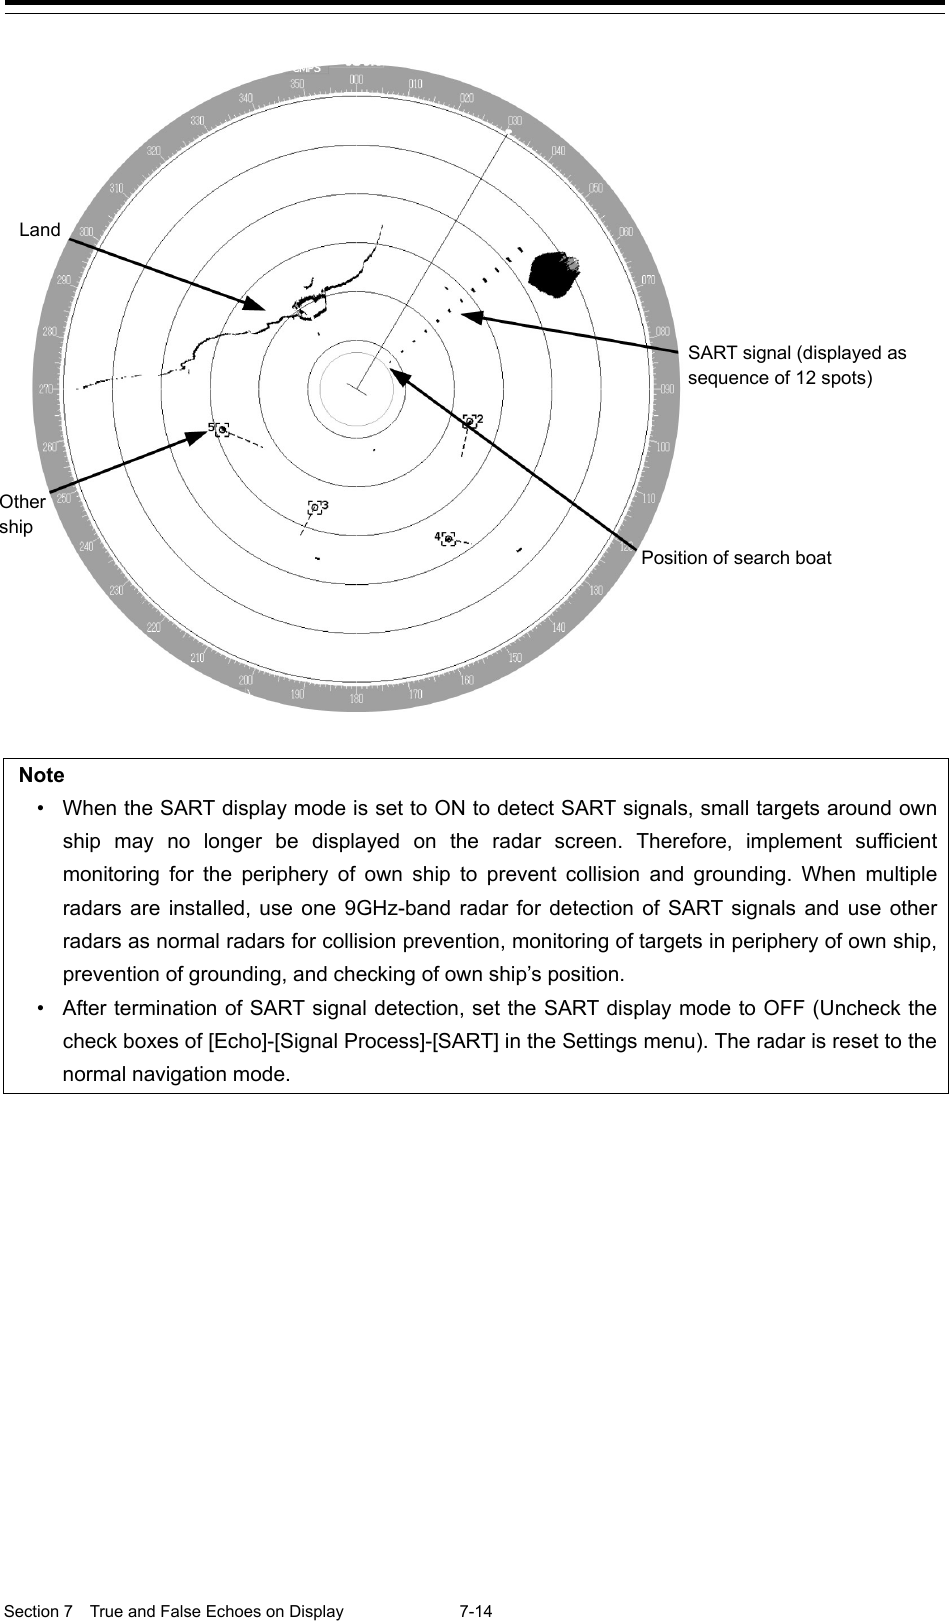  Section 7  True and False Echoes on Display  7-14    Note • When the SART display mode is set to ON to detect SART signals, small targets around own ship may no longer be displayed on the radar screen. Therefore, implement sufficient monitoring for the periphery of own ship to prevent collision and grounding. When multiple radars are installed, use one 9GHz-band radar for detection of SART signals and use other radars as normal radars for collision prevention, monitoring of targets in periphery of own ship, prevention of grounding, and checking of own ship’s position. • After termination of SART signal detection, set the SART display mode to OFF (Uncheck the check boxes of [Echo]-[Signal Process]-[SART] in the Settings menu). The radar is reset to the normal navigation mode.      Land Other ship SART signal (displayed as sequence of 12 spots) Position of search boat 